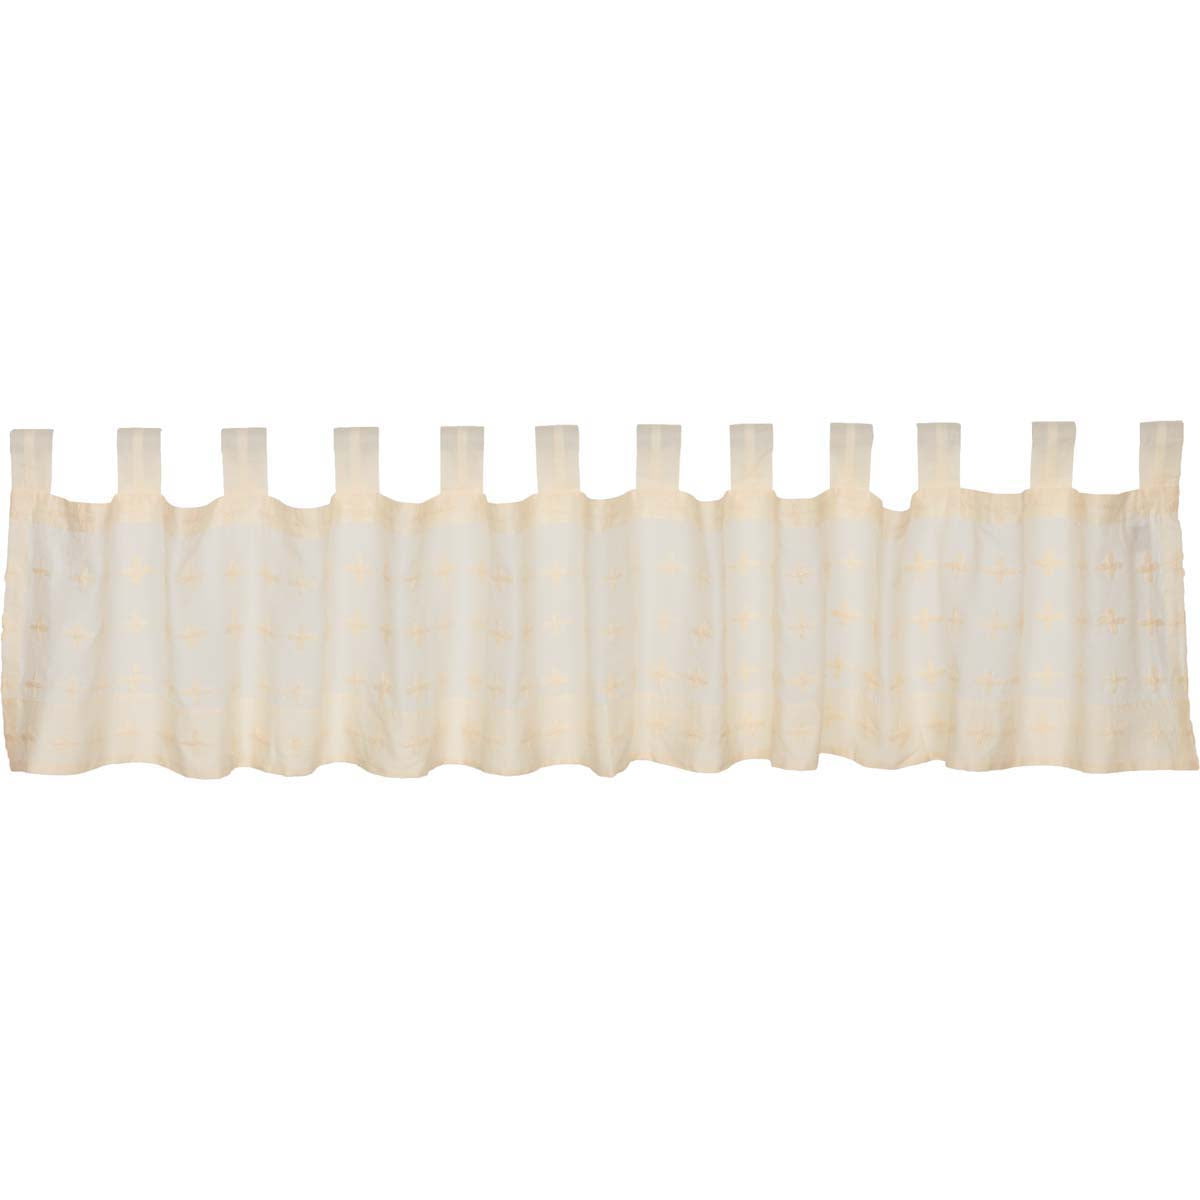 April & Olive Willow Creme Tab Top Valance 16x90 By VHC Brands